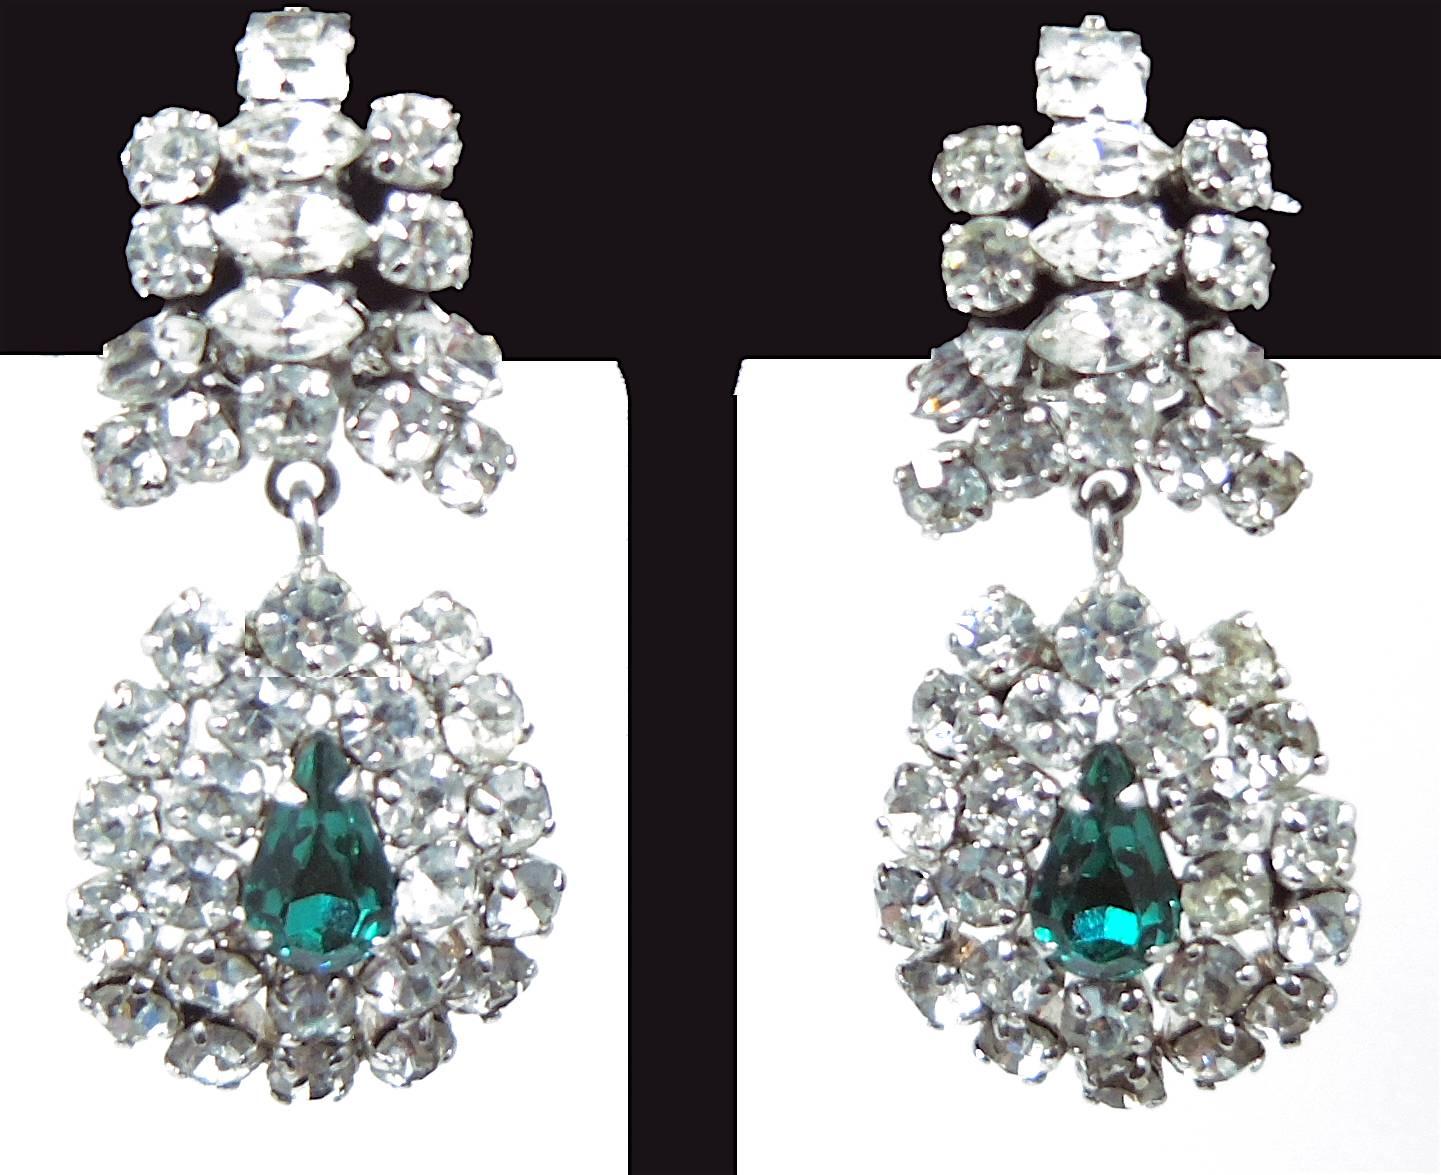 These gorgeous clip earrings are embellished with crystals on top and have an oval design at the drop with a faux green emerald in the center surrounded in layers with brilliant Austrian crystals. They are made in a silver tone setting and measure